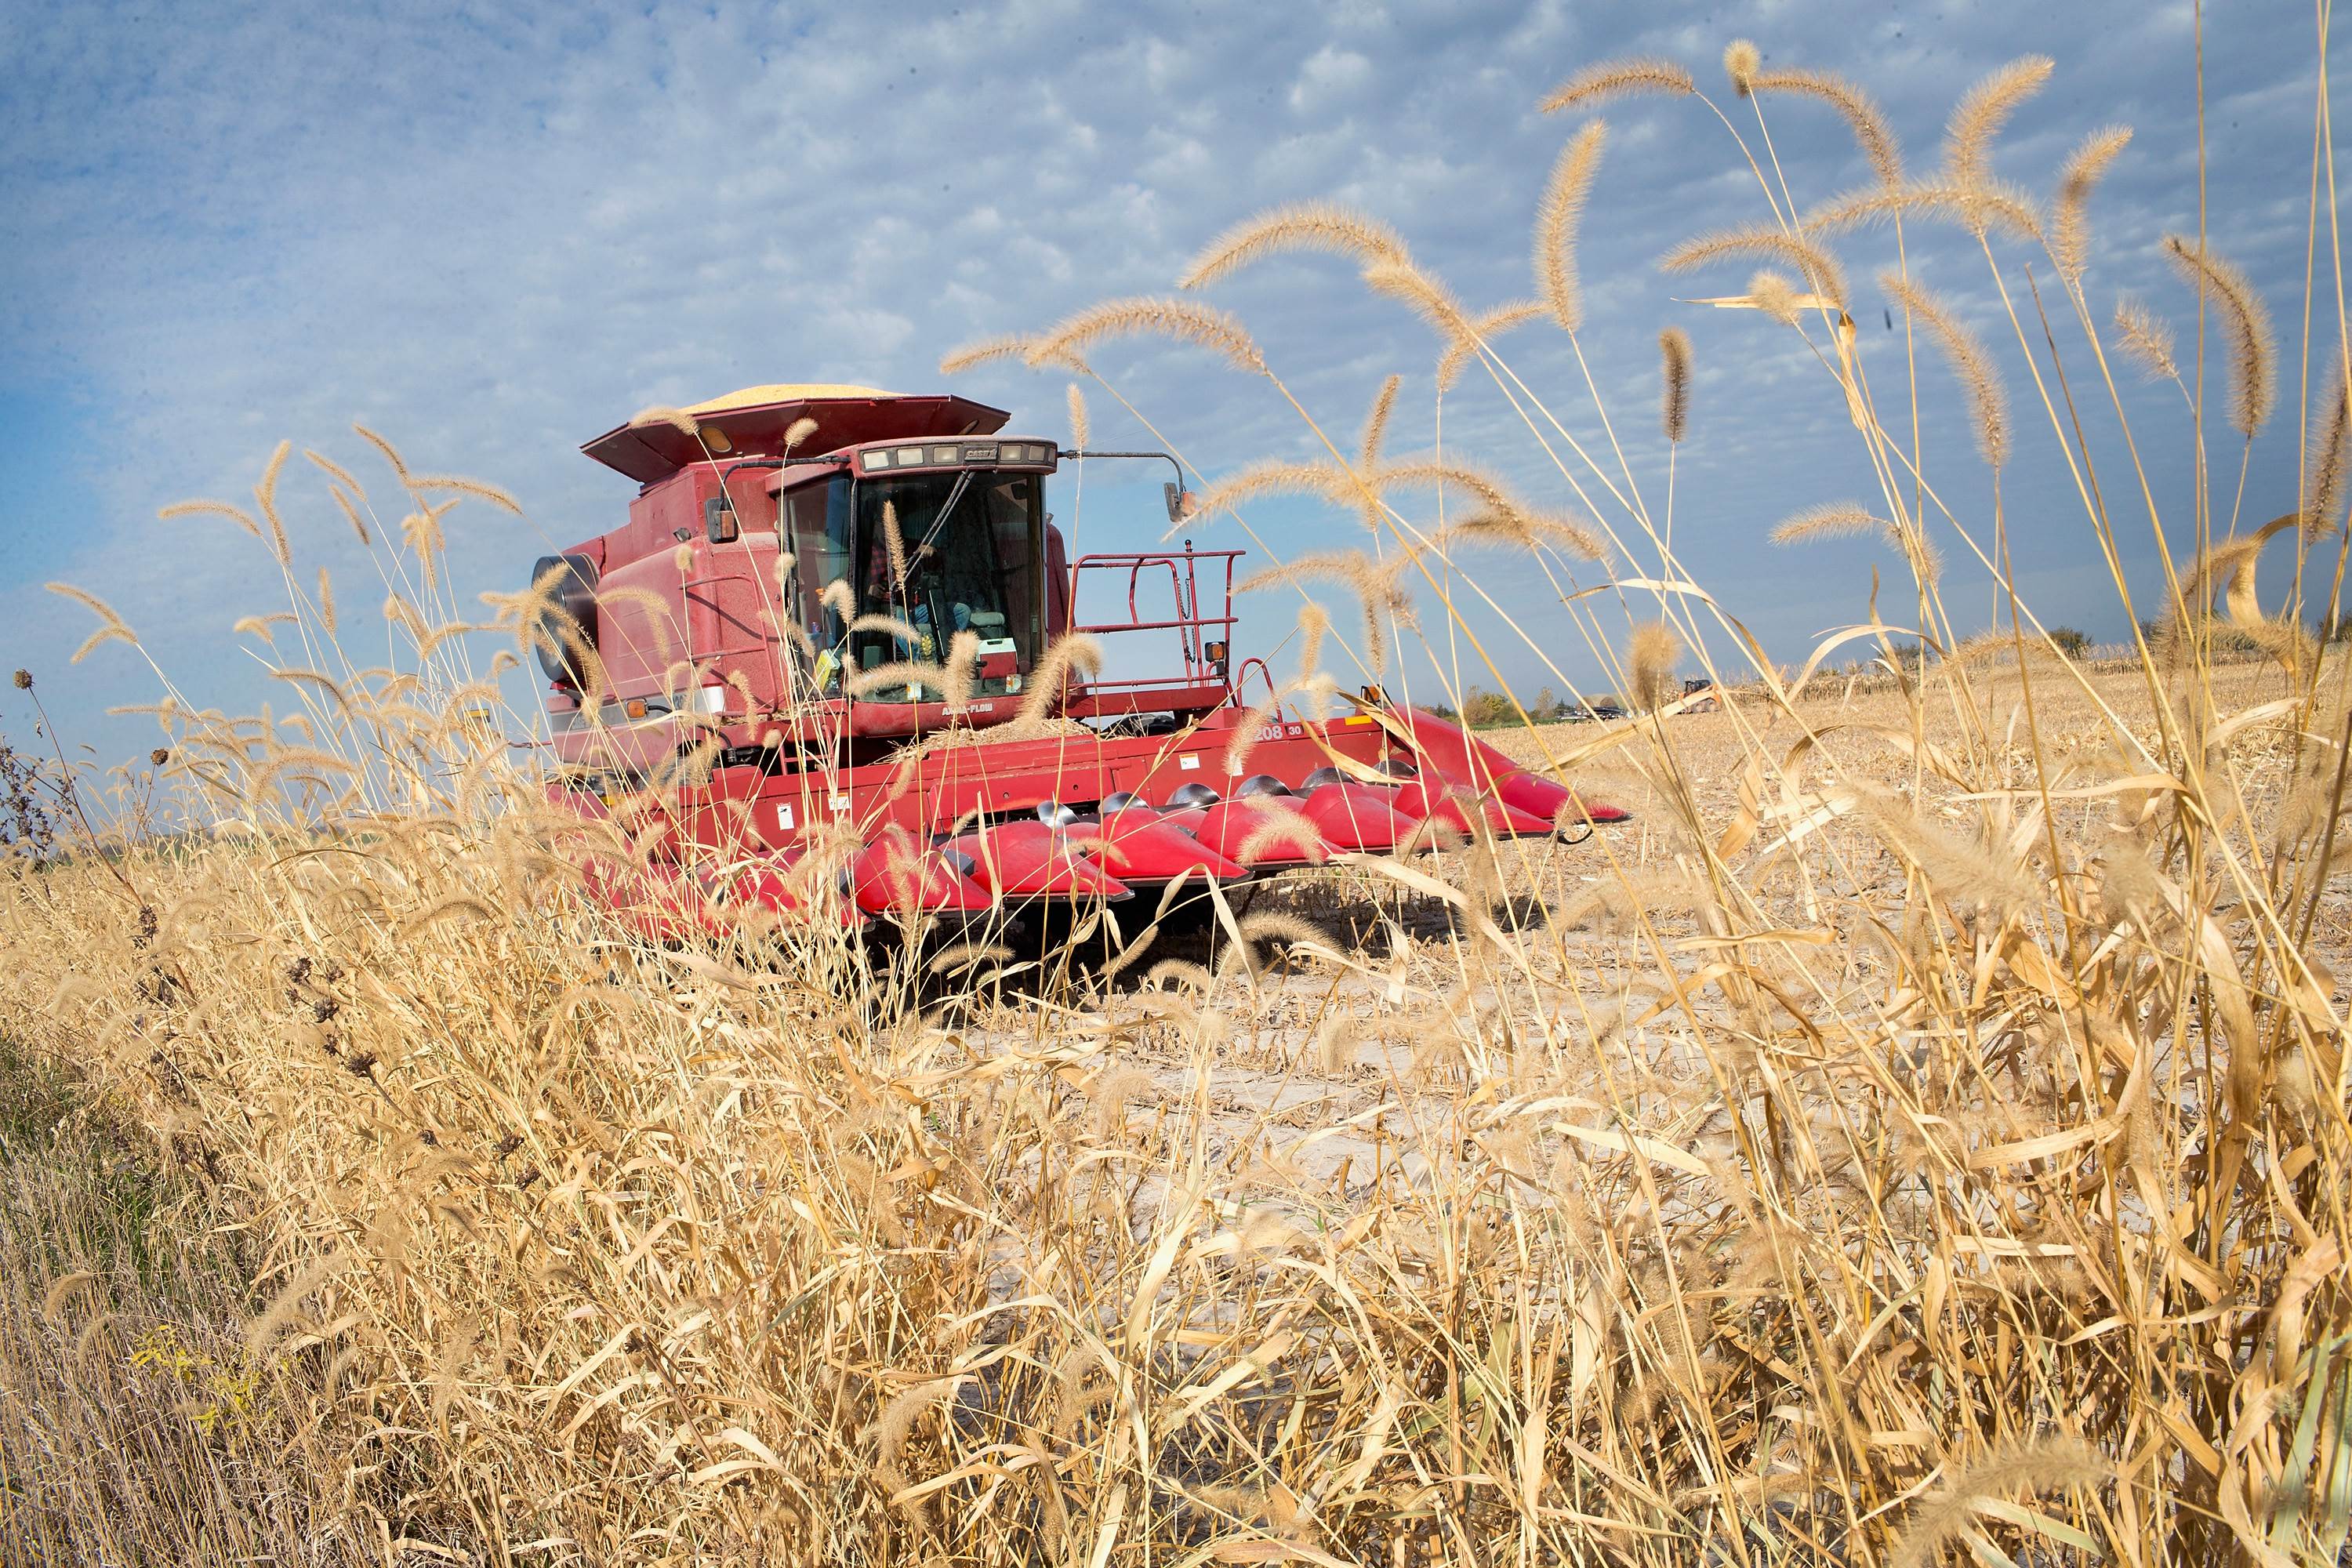 BURLINGTON, IA - OCTOBER 22: Rick Wirt harvests corn on October 22, 2015 near Burlington, Iowa. Wirt and his daughter Krista Kempker farm more than 2,000 acres in th area. According to the National Corn Growers Association, the overall corn crop is on track to have the 2nd highest average yield on record Scott Olson/Getty Images/AFP == FOR NEWSPAPERS, INTERNET, TELCOS & TELEVISION USE ONLY ==